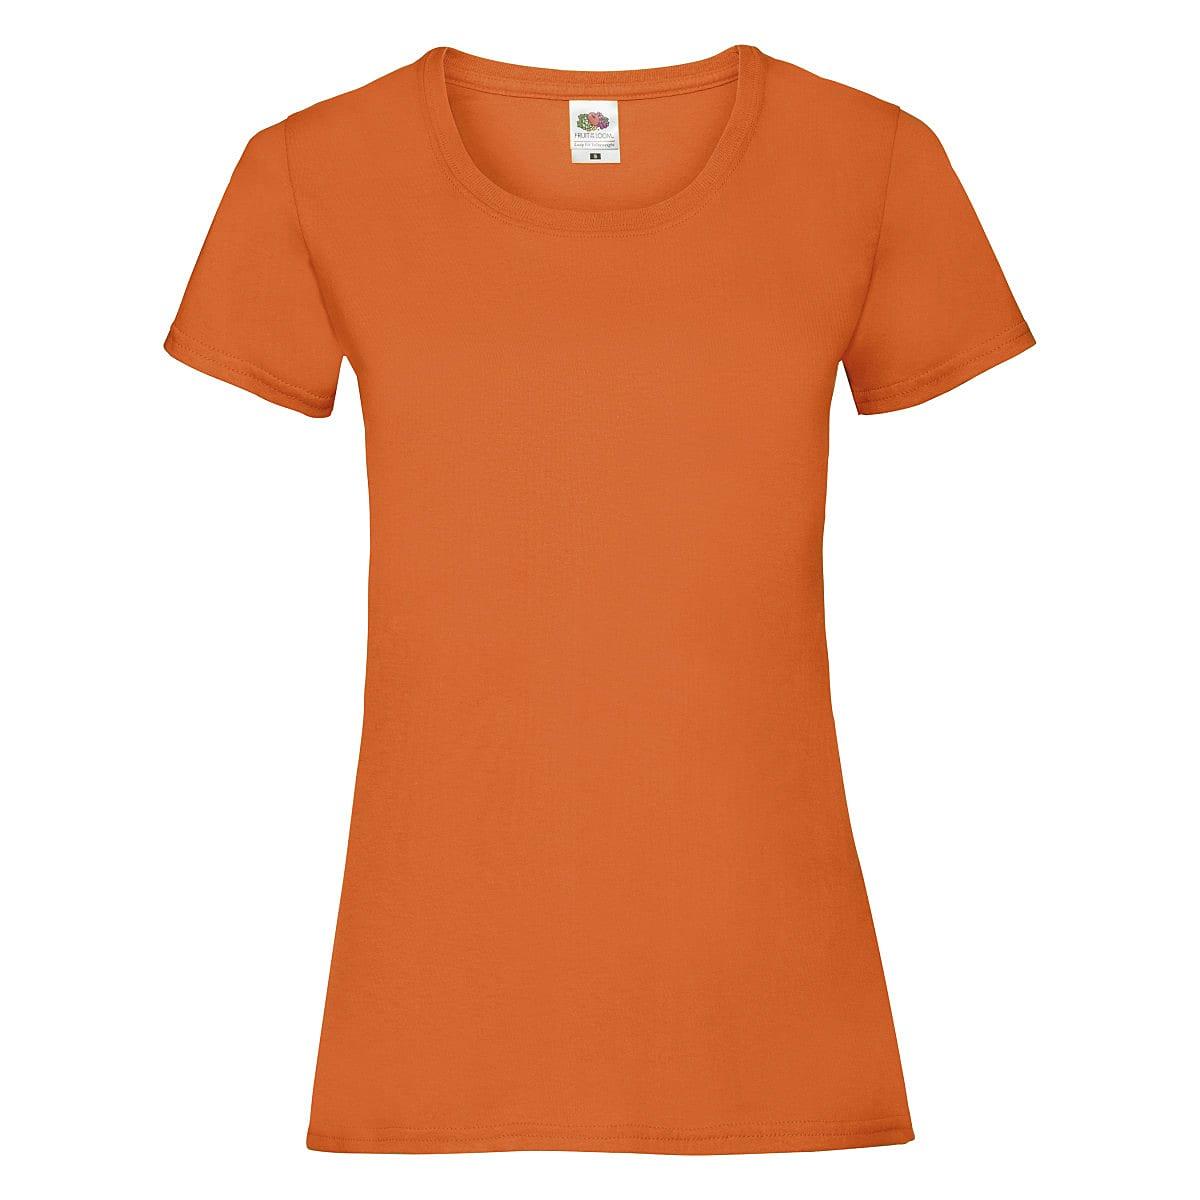 Fruit Of The Loom Lady-Fit Valueweight T-Shirt in Orange (Product Code: 61372)